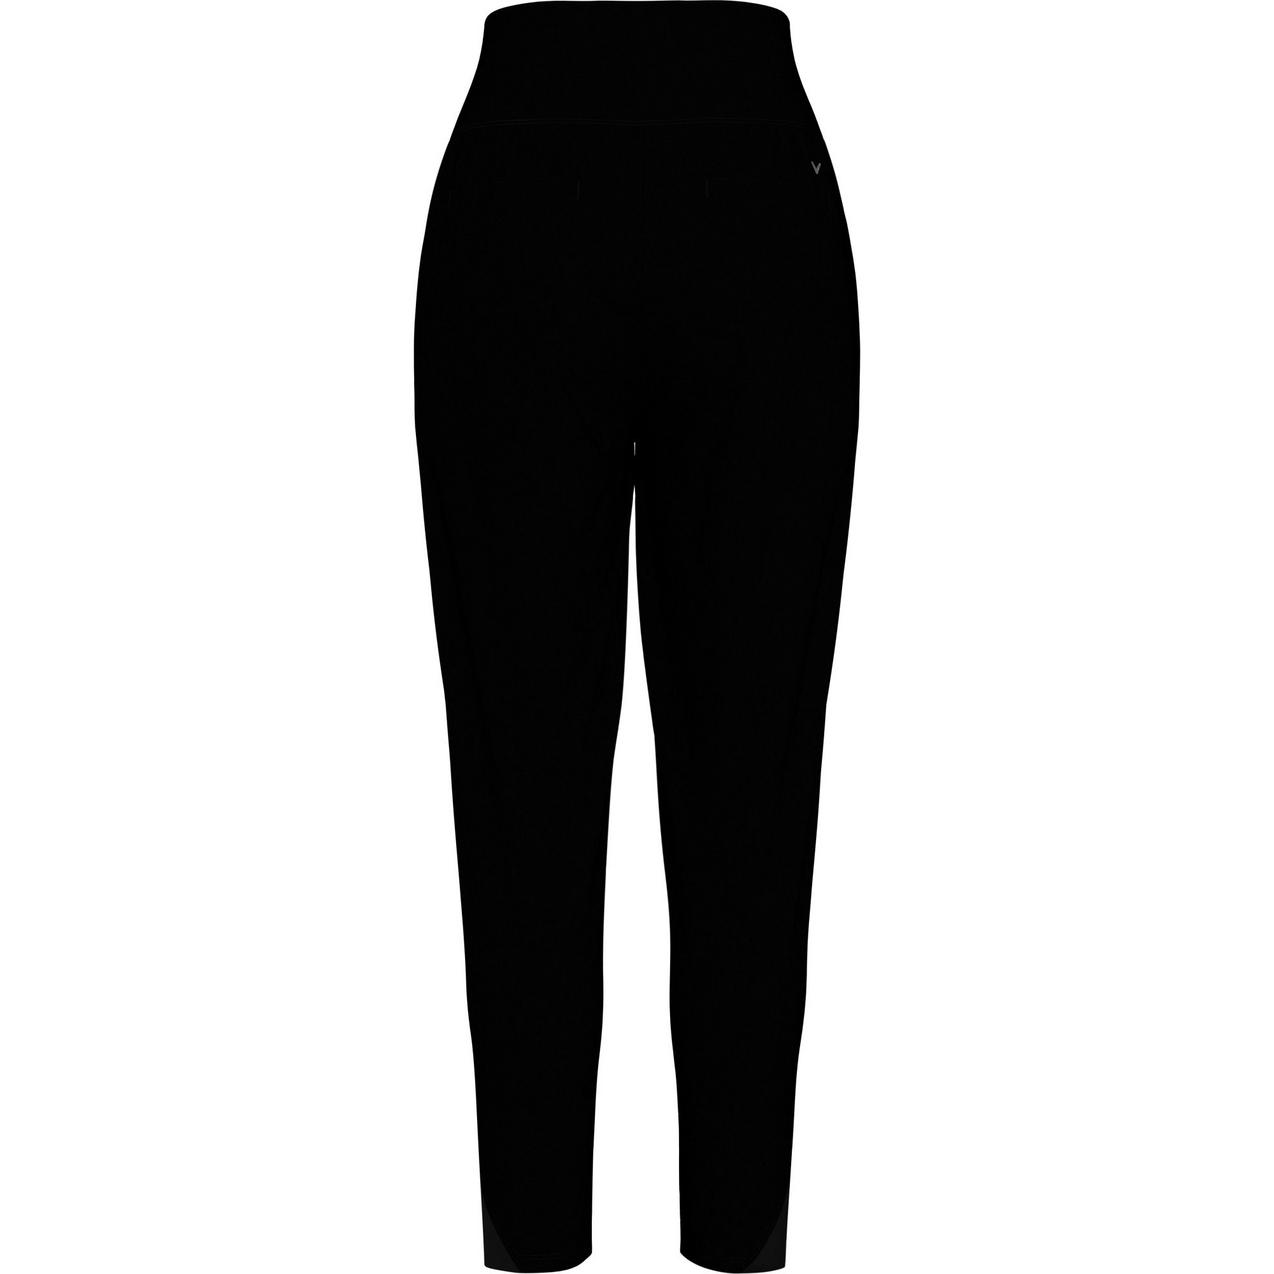 CALLAWAY Women's Lightweight Stretch Ankle Pant